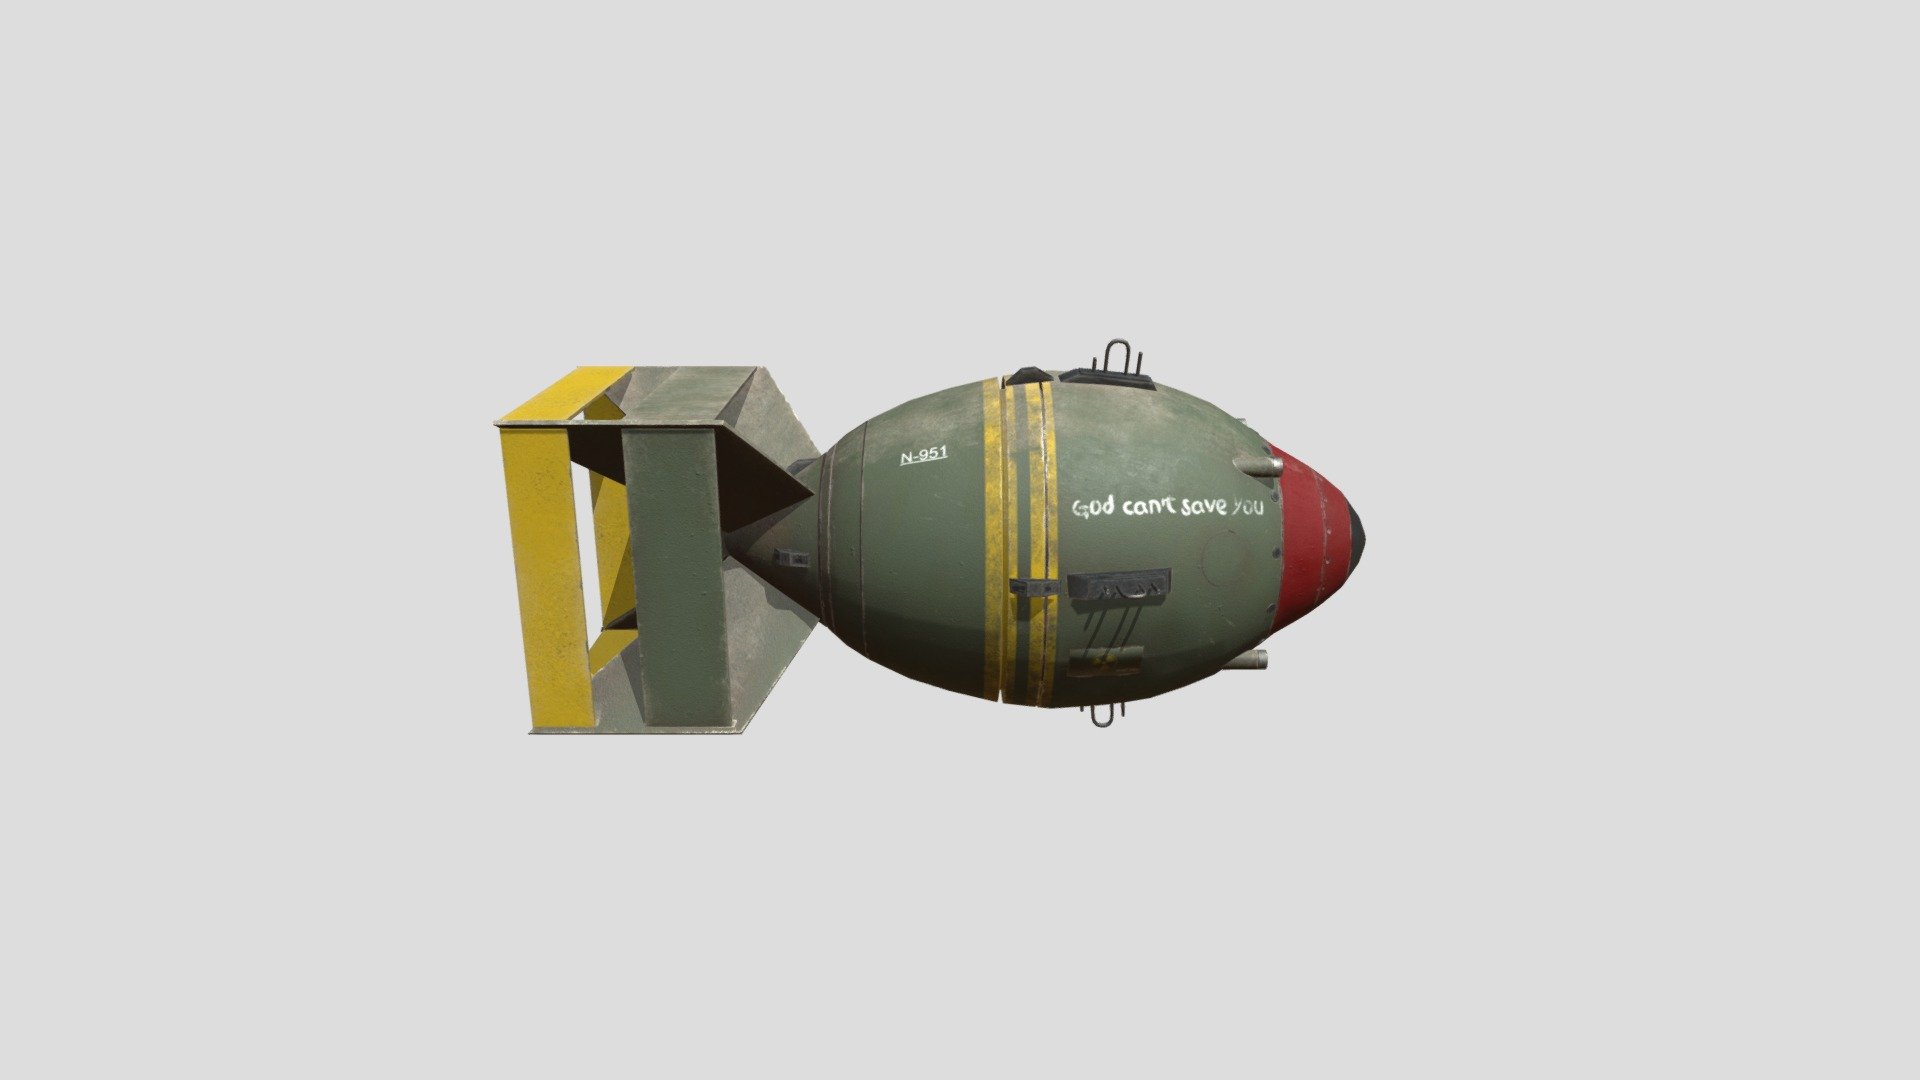 Let me introduce you to this fictional nuclear bomb developed by the americans during the second world war. its explosion is estimated at several megatons and its blast is destructive. It is inspired by a famous video game whose name you probably know.




Low poly

2PBR Material

1 FBX tris optimized for games

1 FBX quad

4K Textures
 - Nuke bomb - 3D model by Artyooooom 3d model